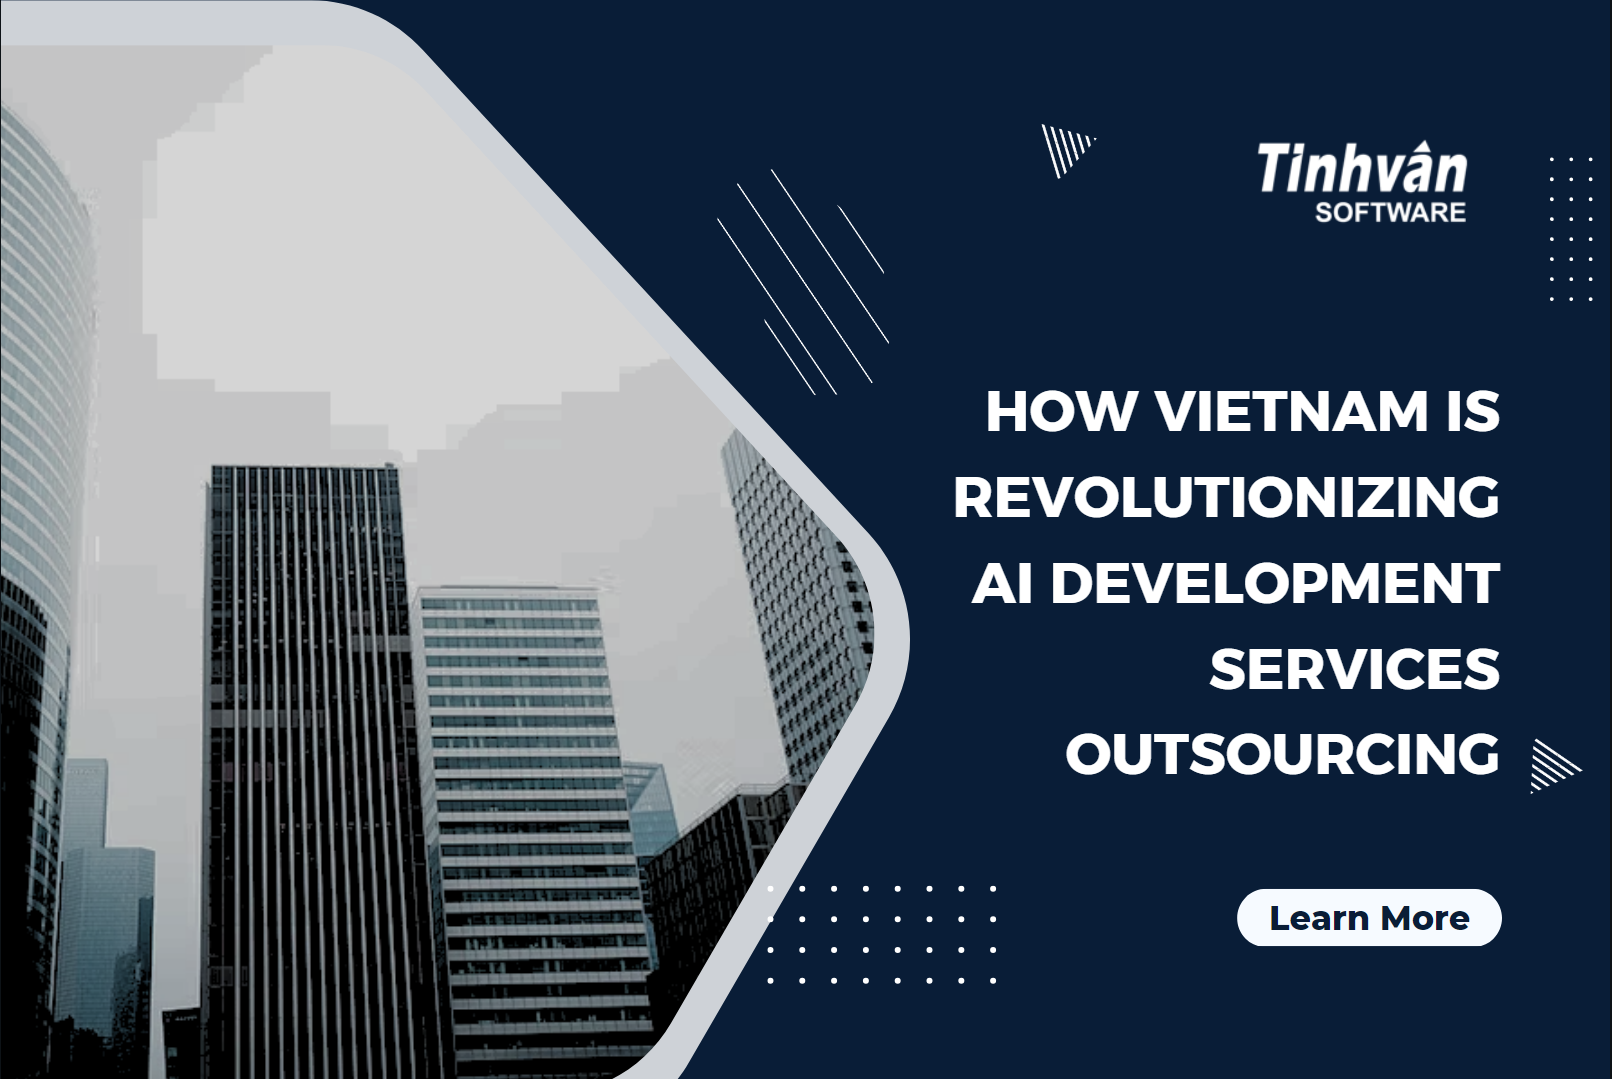 Unlocking Growth Potential: How Vietnam is Revolutionizing AI Development Services Outsourcing